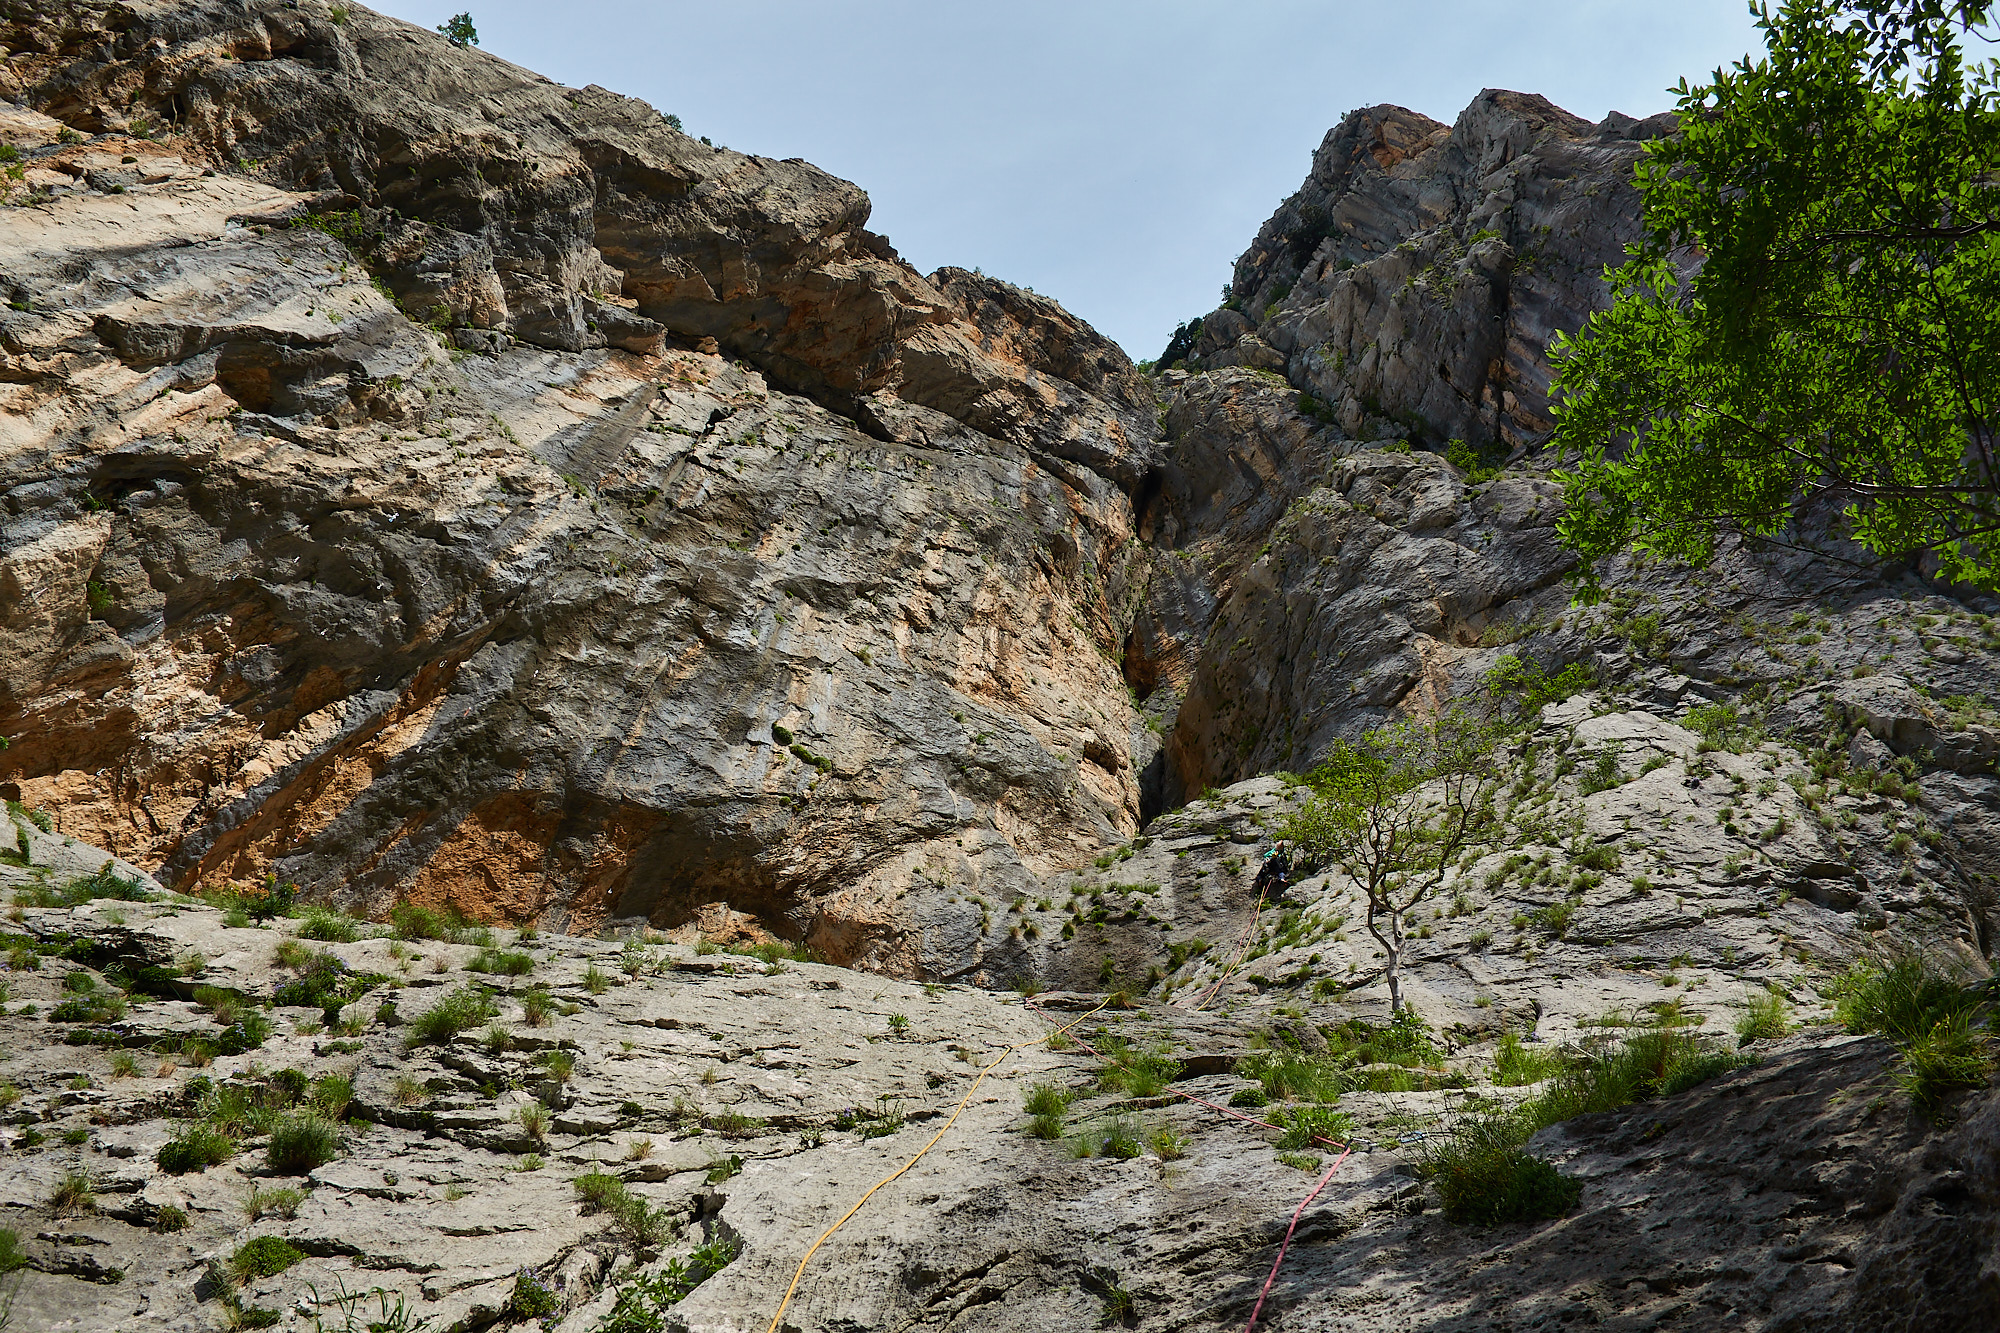 A climber on the first pitch of a route called Slovenski PIPS on a large limestone cliff called Debeli Kuk in the Paklenica gorge in Croatia